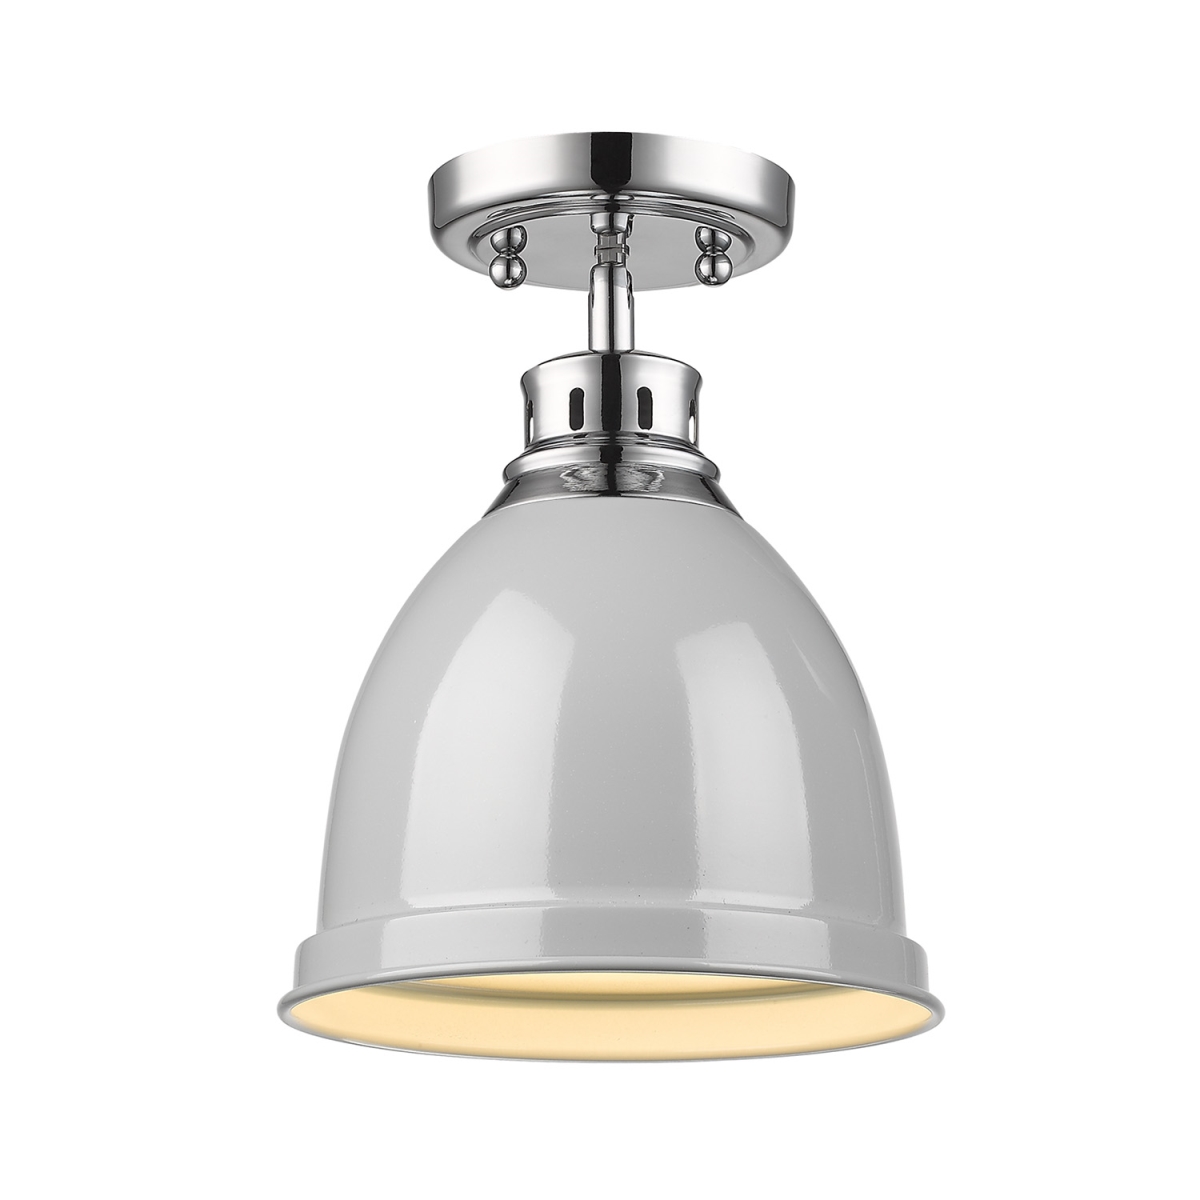 3602-fm Ch-gy Duncan Flush Mount Light With Gray Shade, Chrome